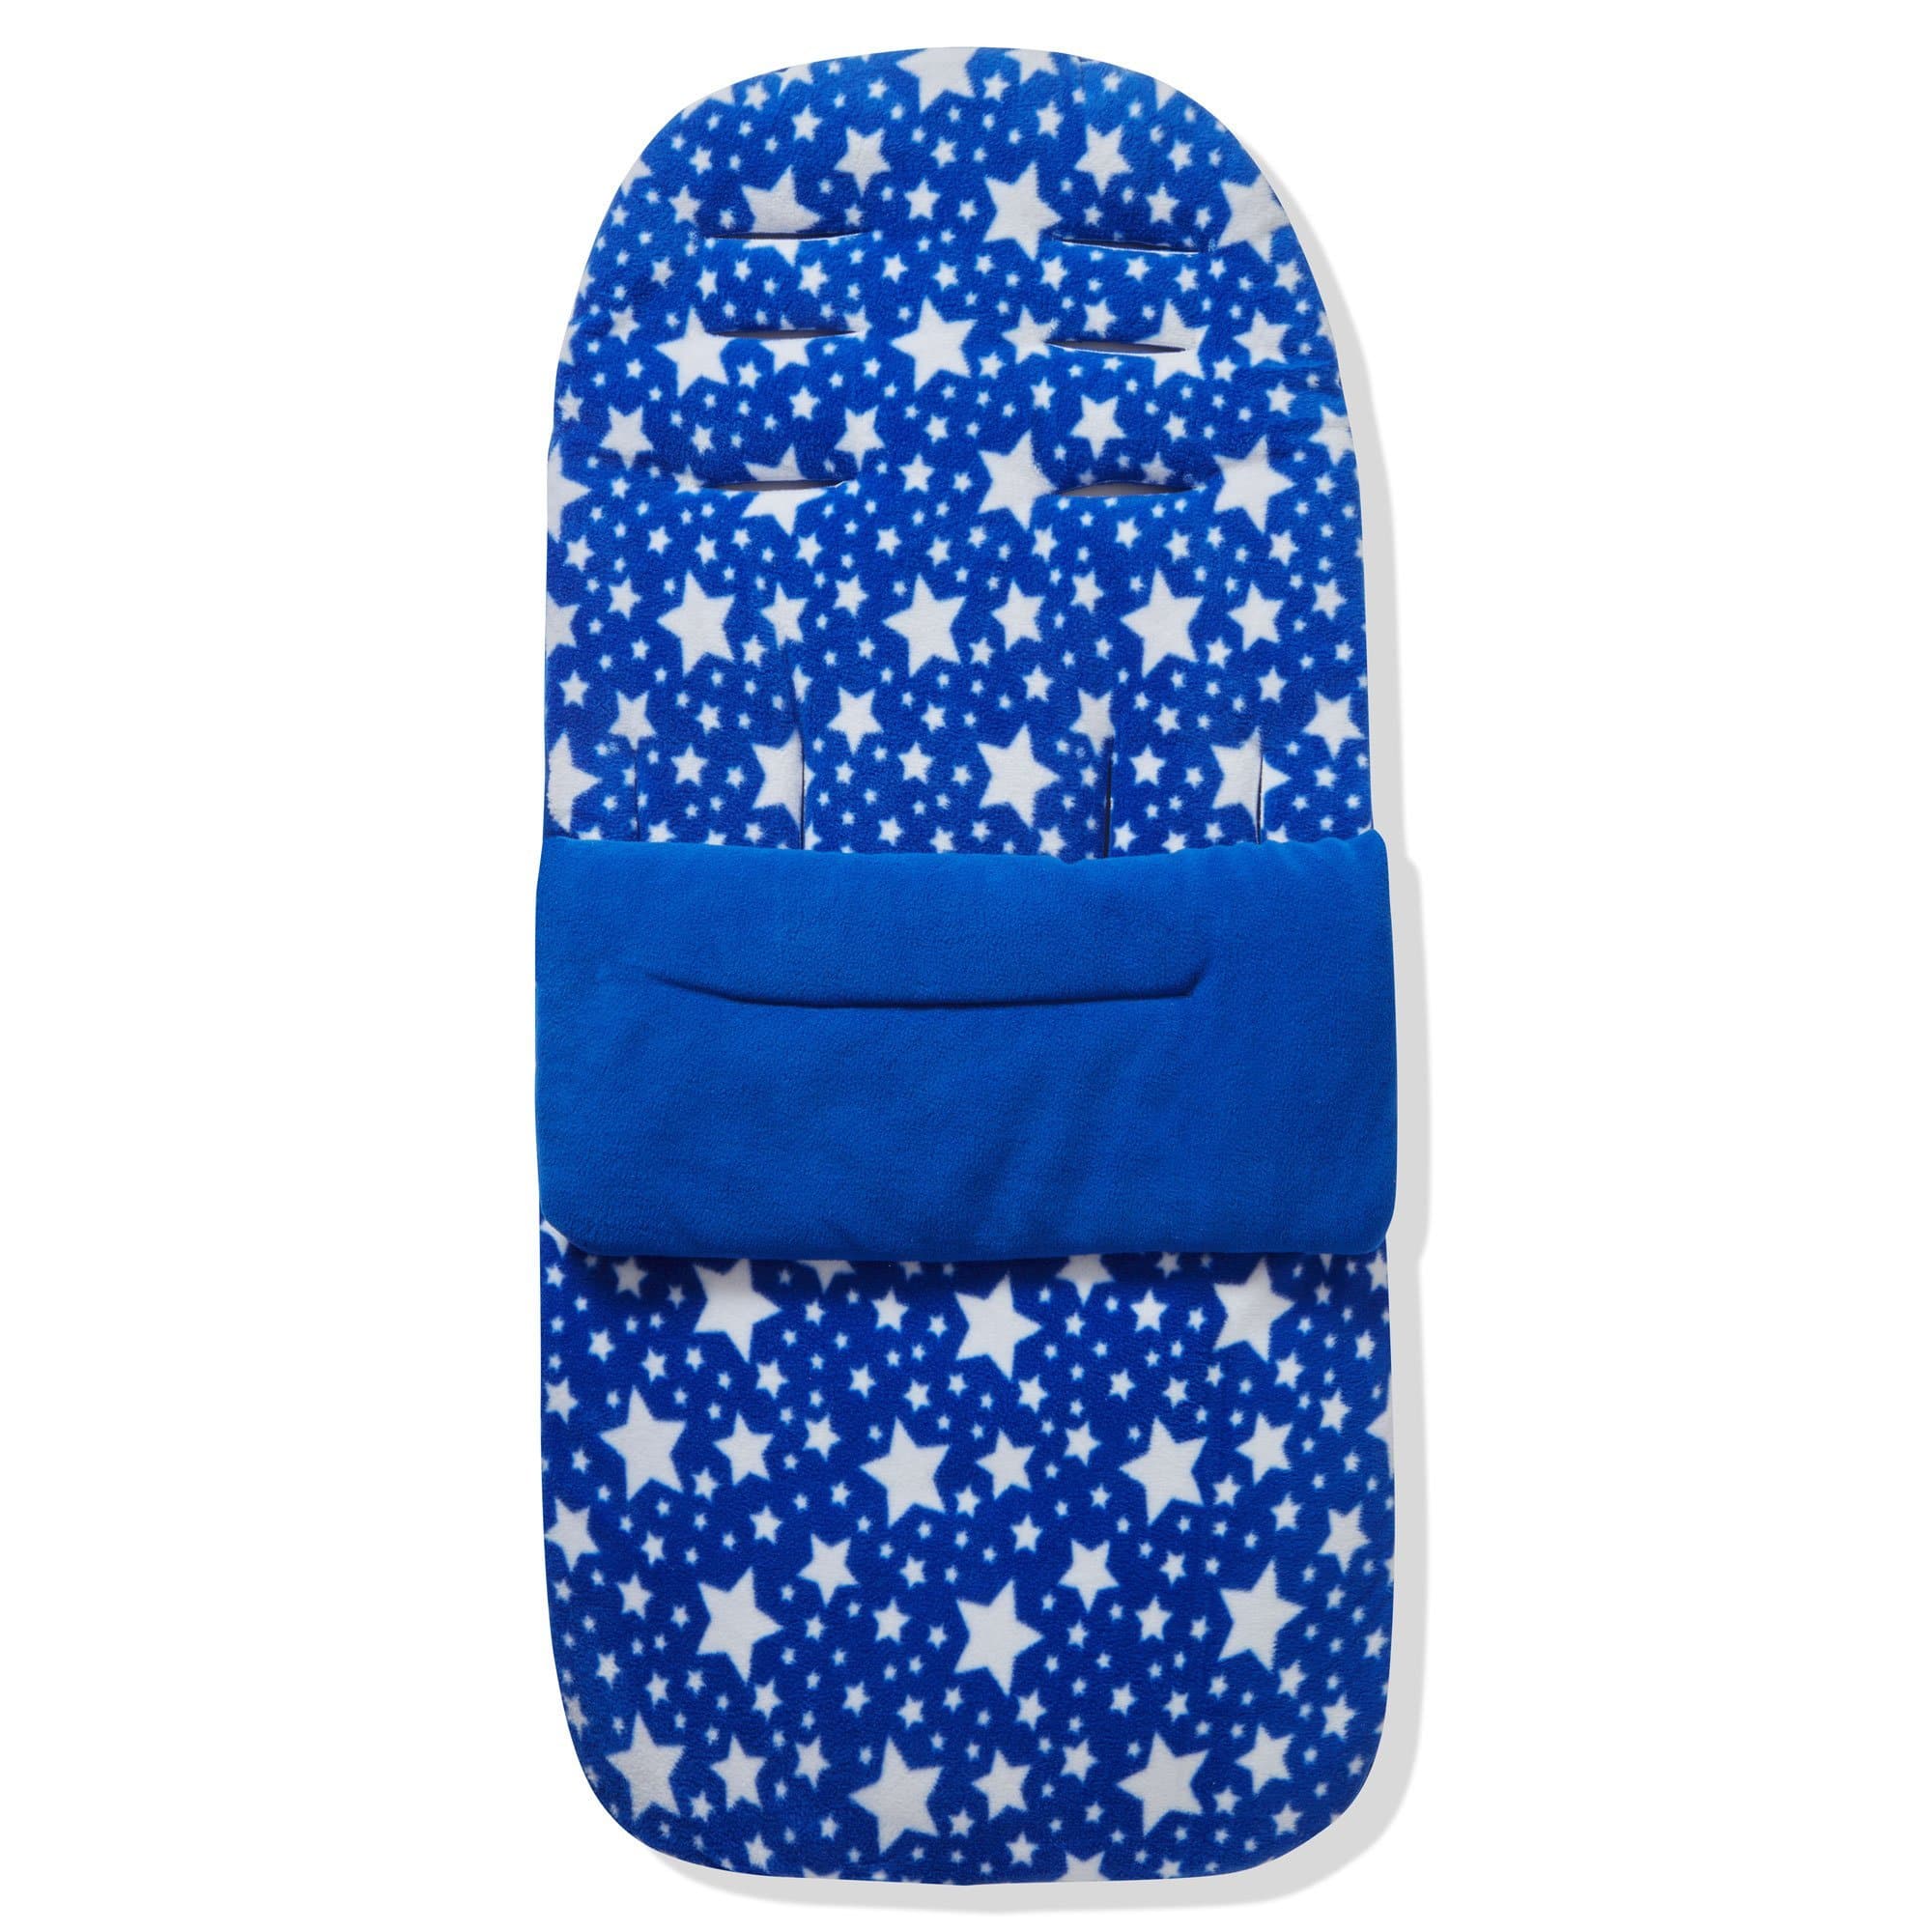 Fleece Footmuff / Cosy Toes Compatible with Emmaljunga - Blue Star / Fits All Models | For Your Little One